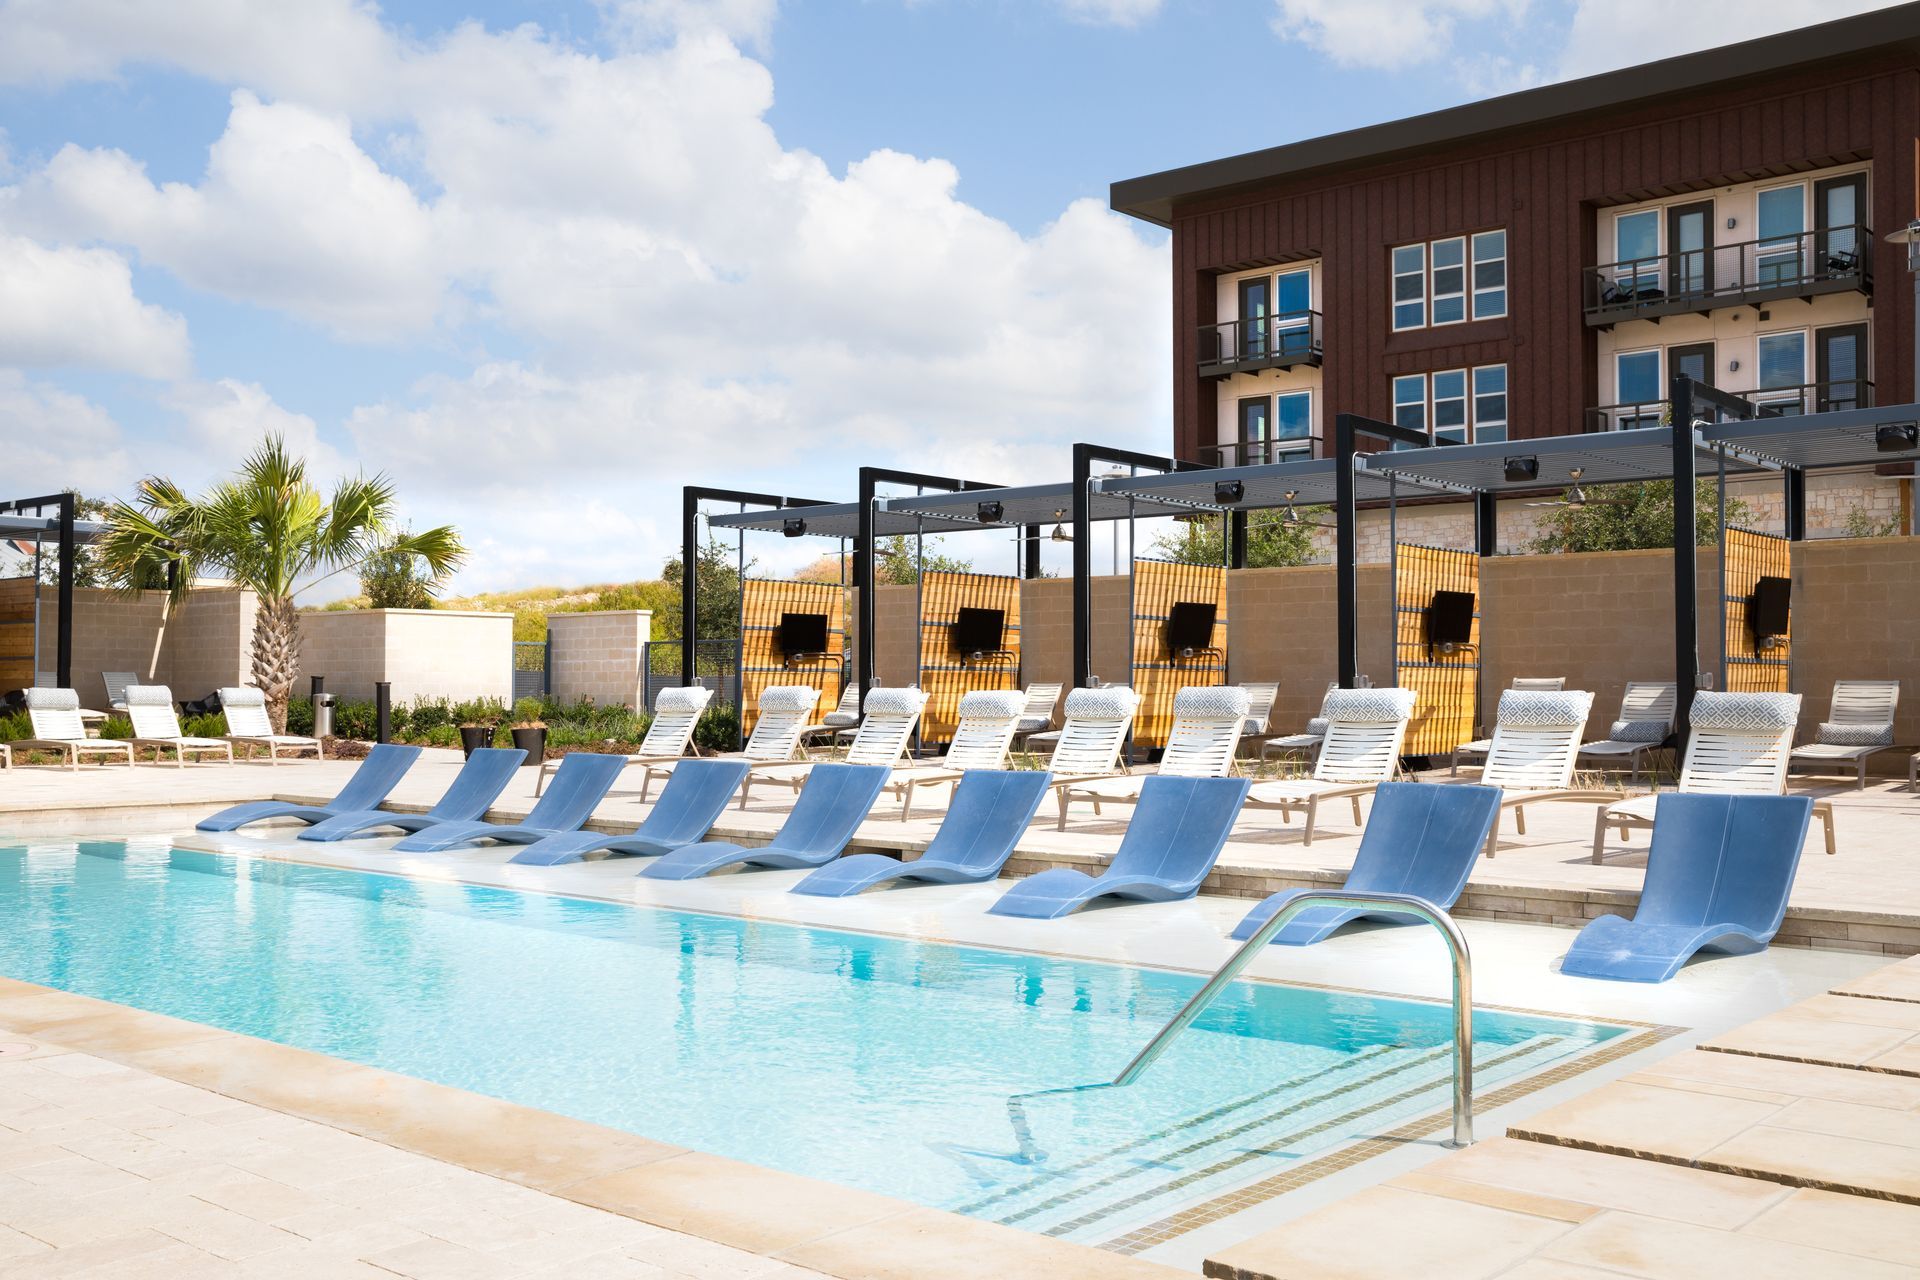 An outdoor swimming pool surrounded by chairs and umbrellas in front of Parkside at Craig Ranch's apartment building.